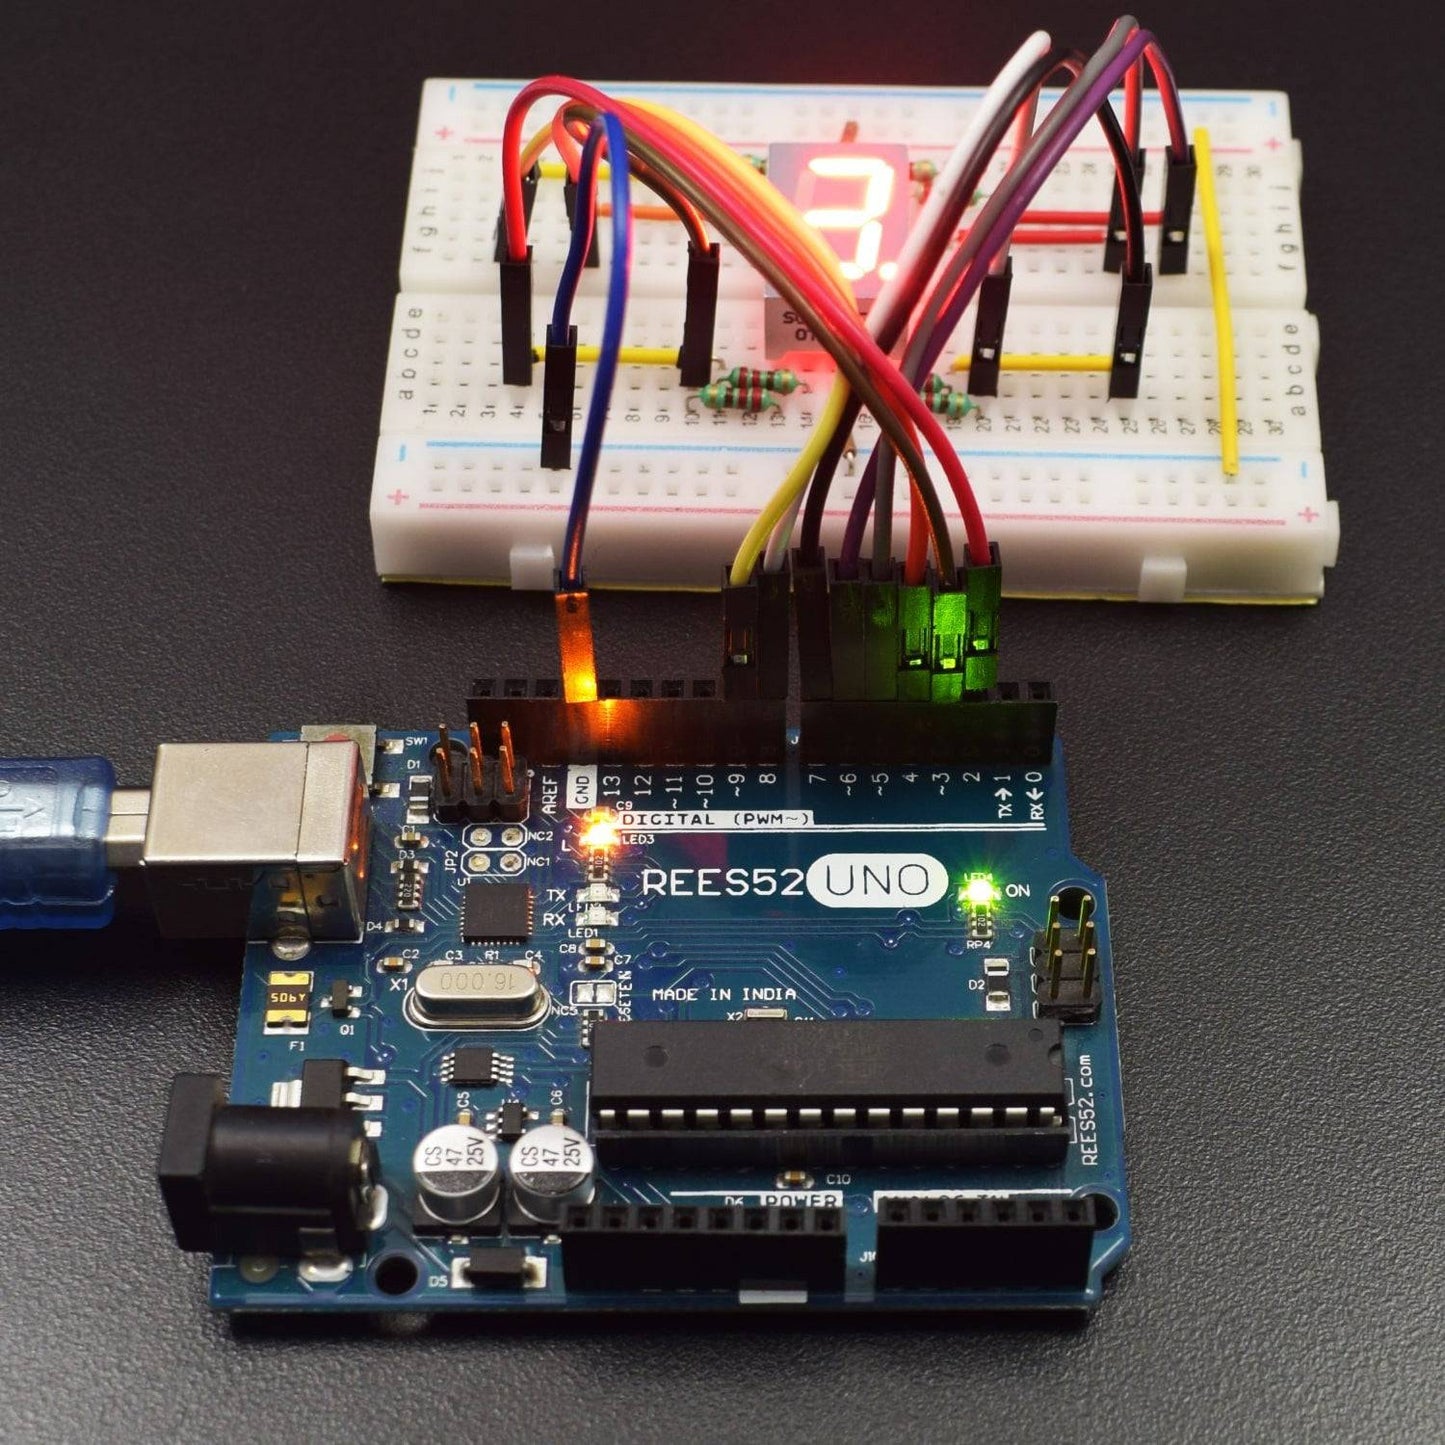 Make a launch pad count down sequence display using 7 segment display interfacing with Arduino uno - KT936 - REES52